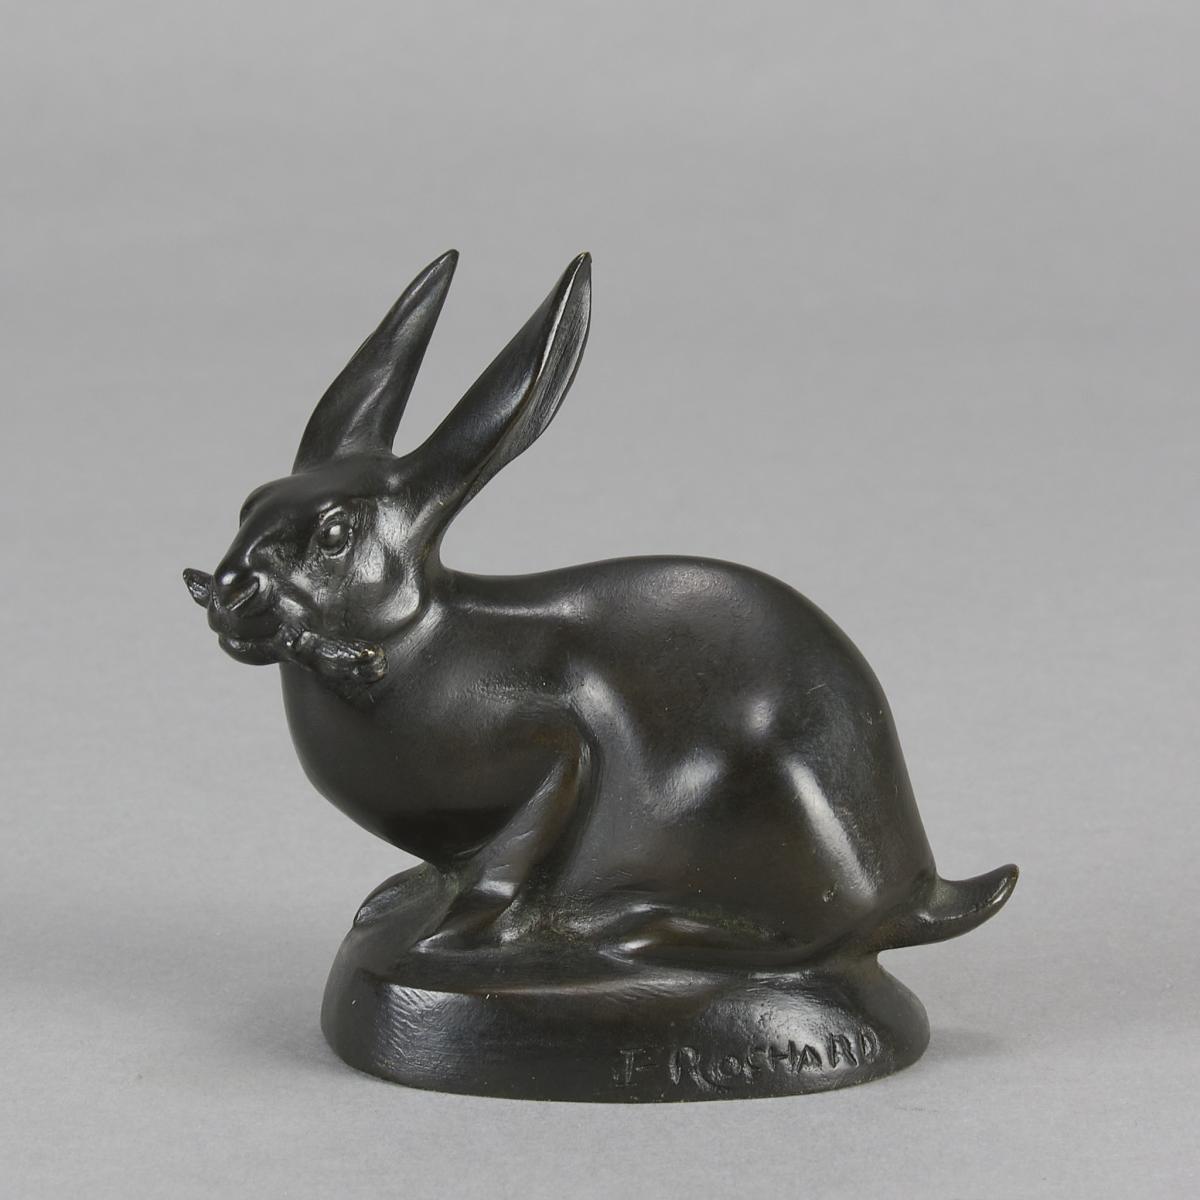  Early 20th Century Art Deco Study entitled "Lapin Assis" By Irénée Rochard